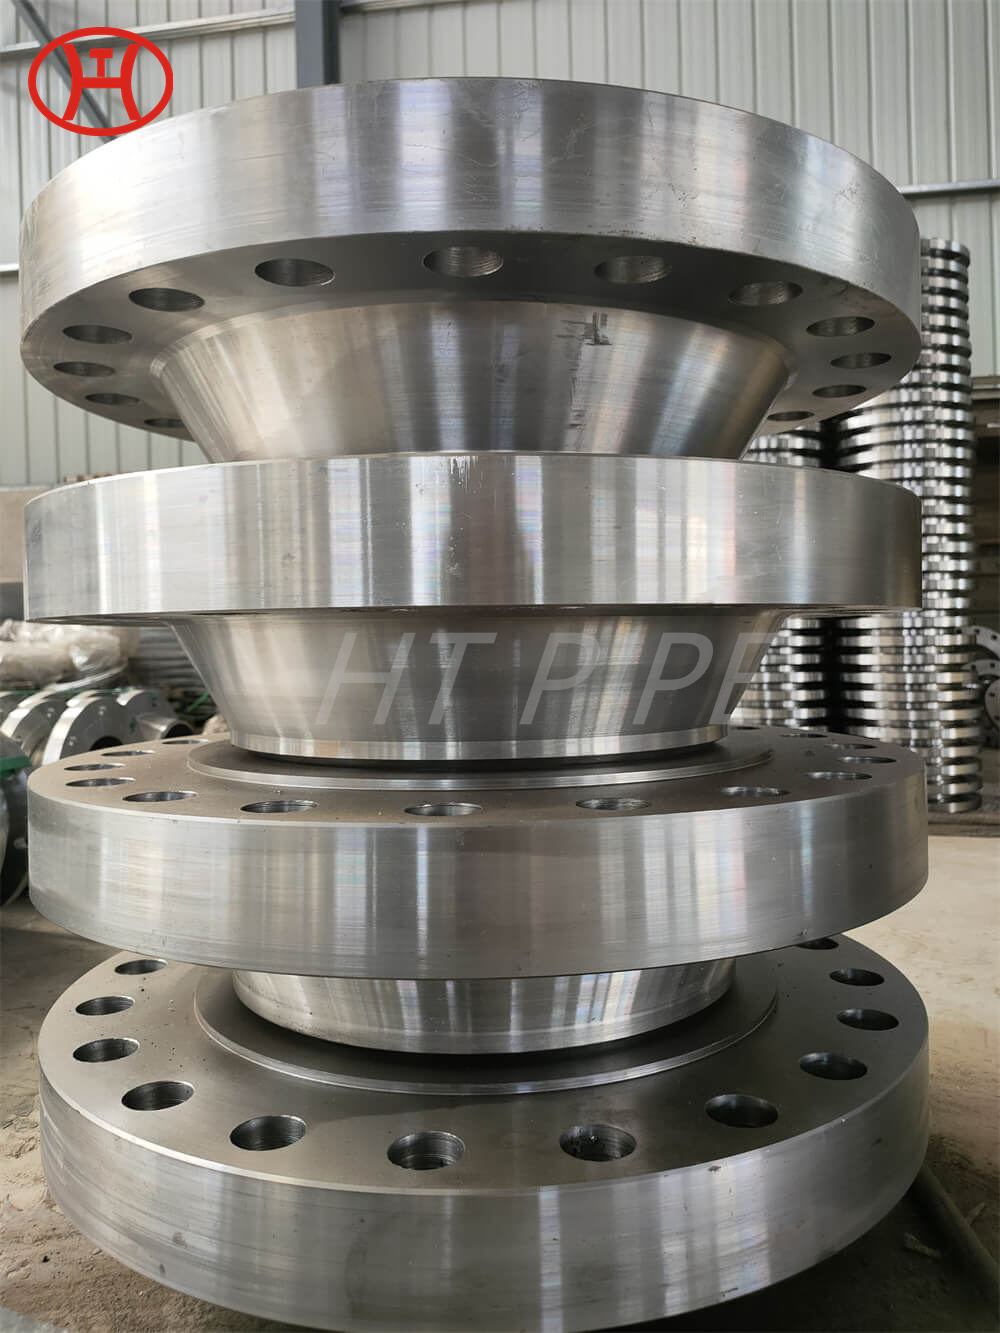 about 20 years oem experience cnc machining duplex flanges for pipe